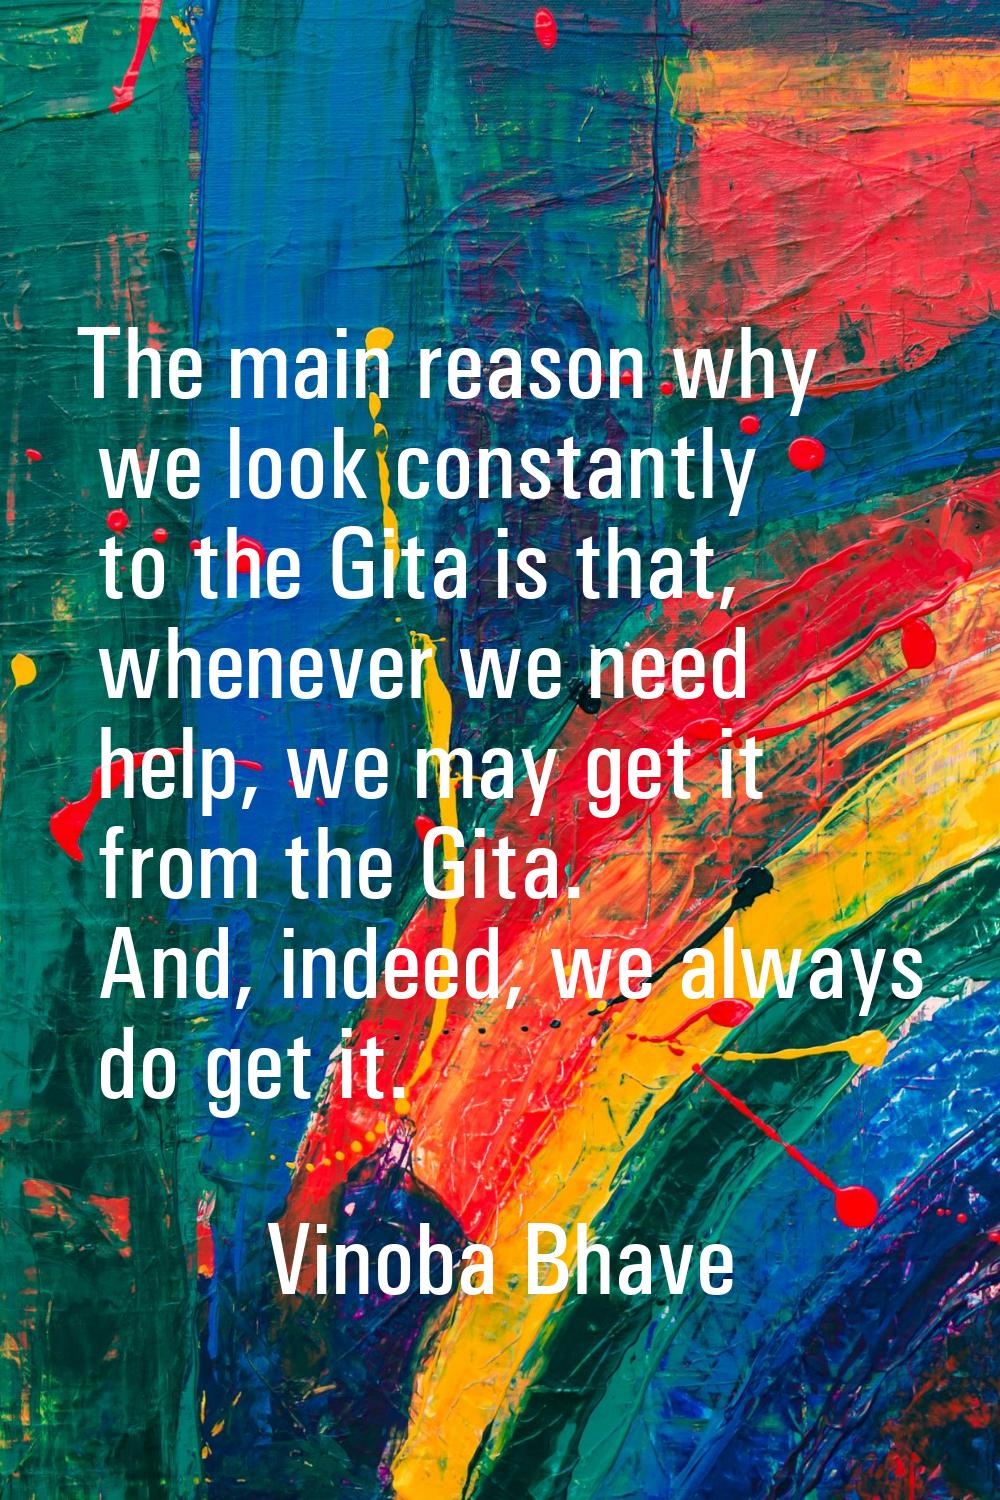 The main reason why we look constantly to the Gita is that, whenever we need help, we may get it fr